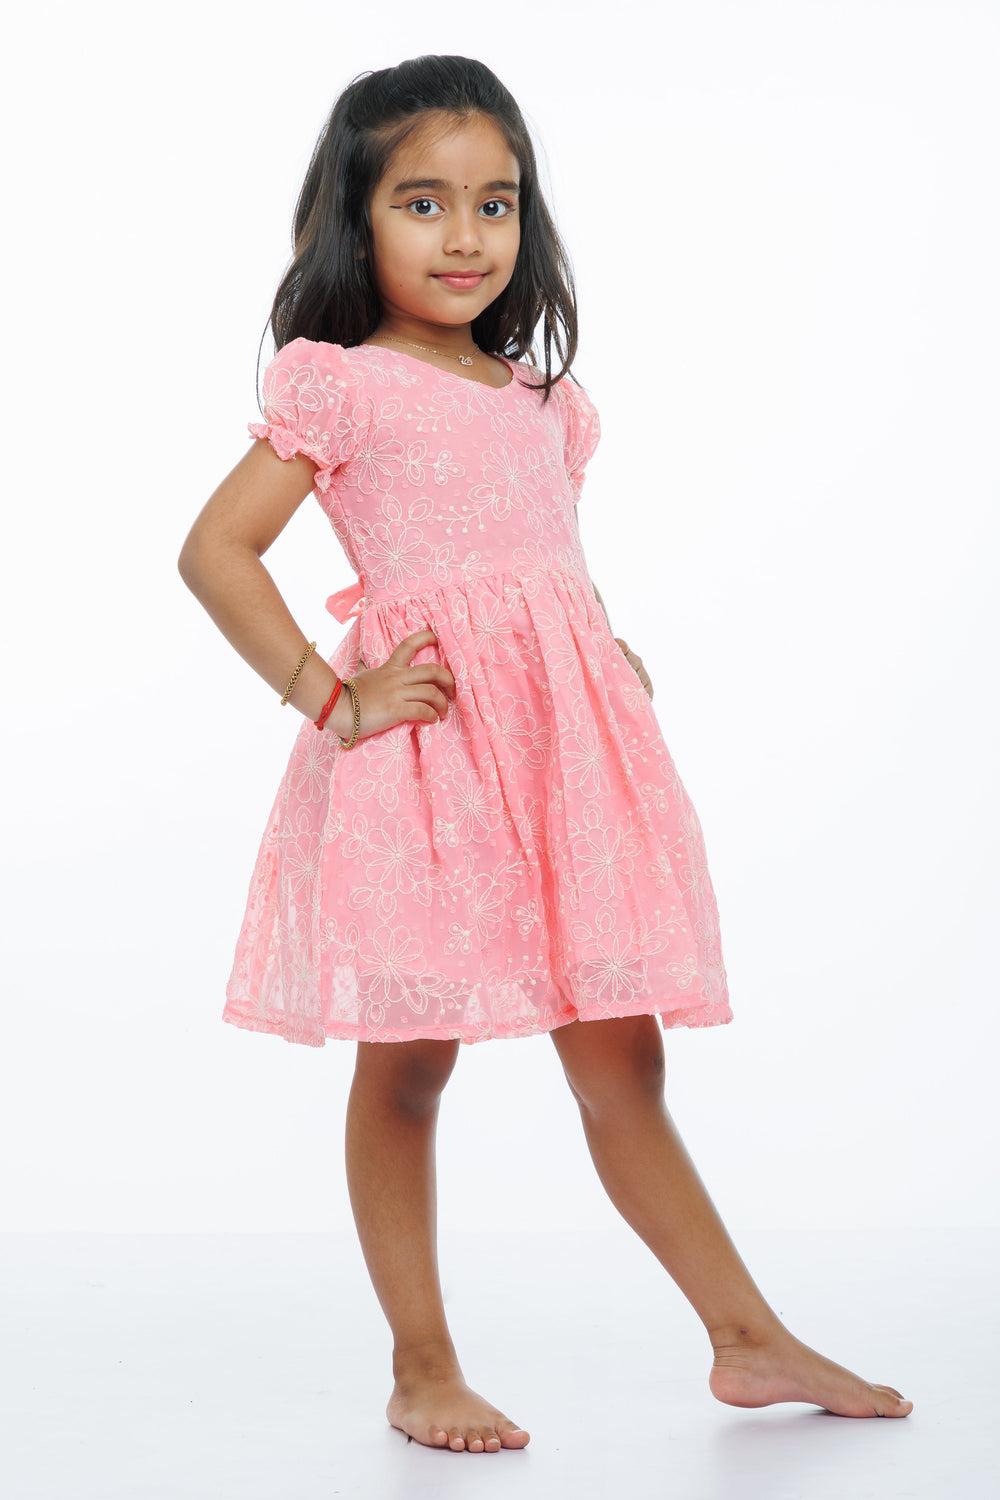 The Nesavu Girls Cotton Frock Sweet Blossom Pink Cotton Frock for Girls with Delicate Embroidery Nesavu Girls Embroidered Pink Cotton Summer Dress | Traditional & Trendy | The Nesavu